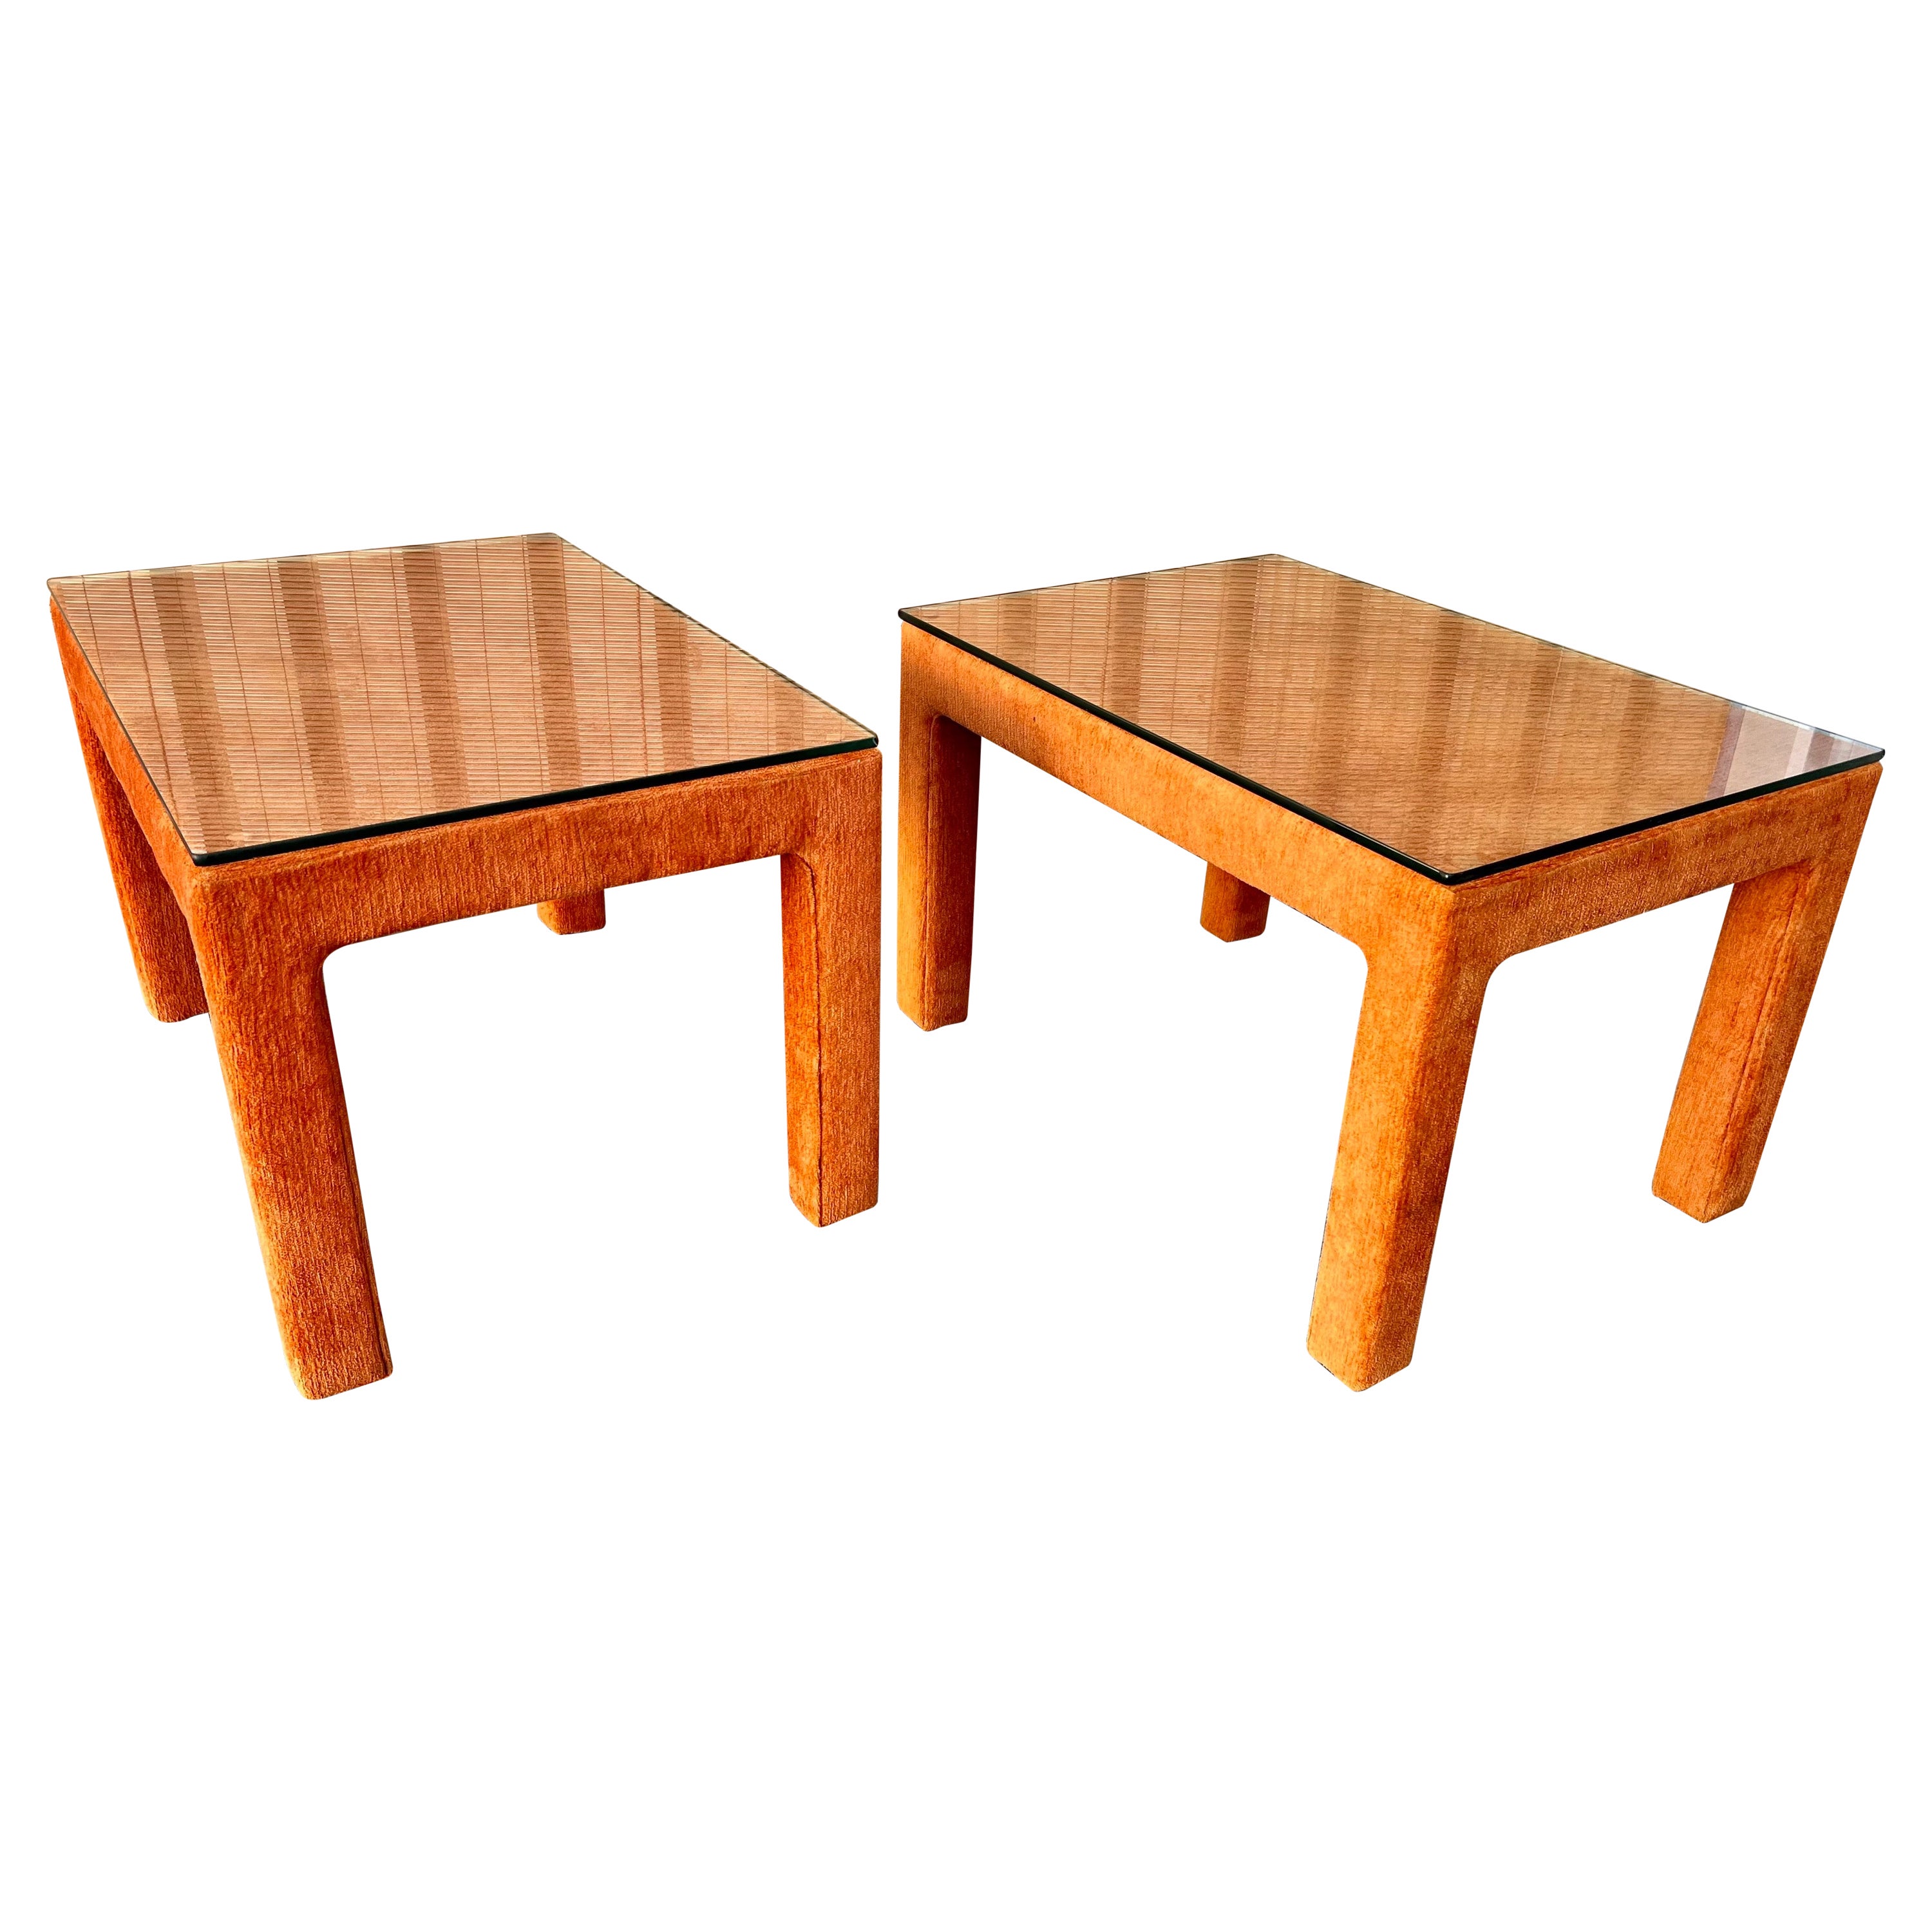 Pair of Mid-Century Modern Fully Upholstered Side Tables, circa 1970s